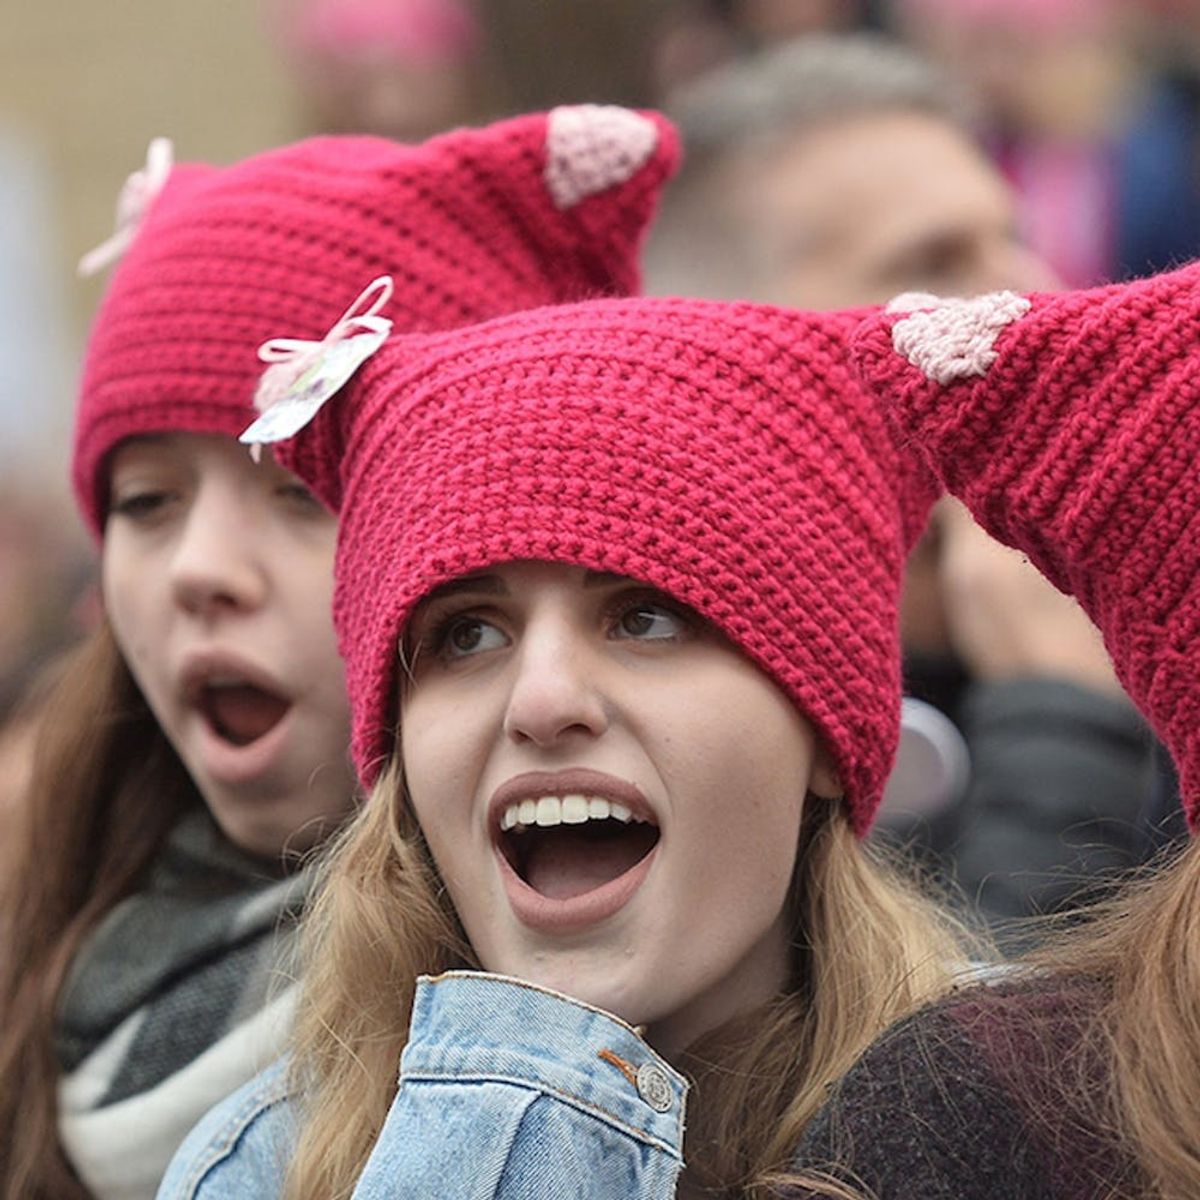 Amid Controversy and Tension, Some Cities Are Pulling Out of Women’s March 2019